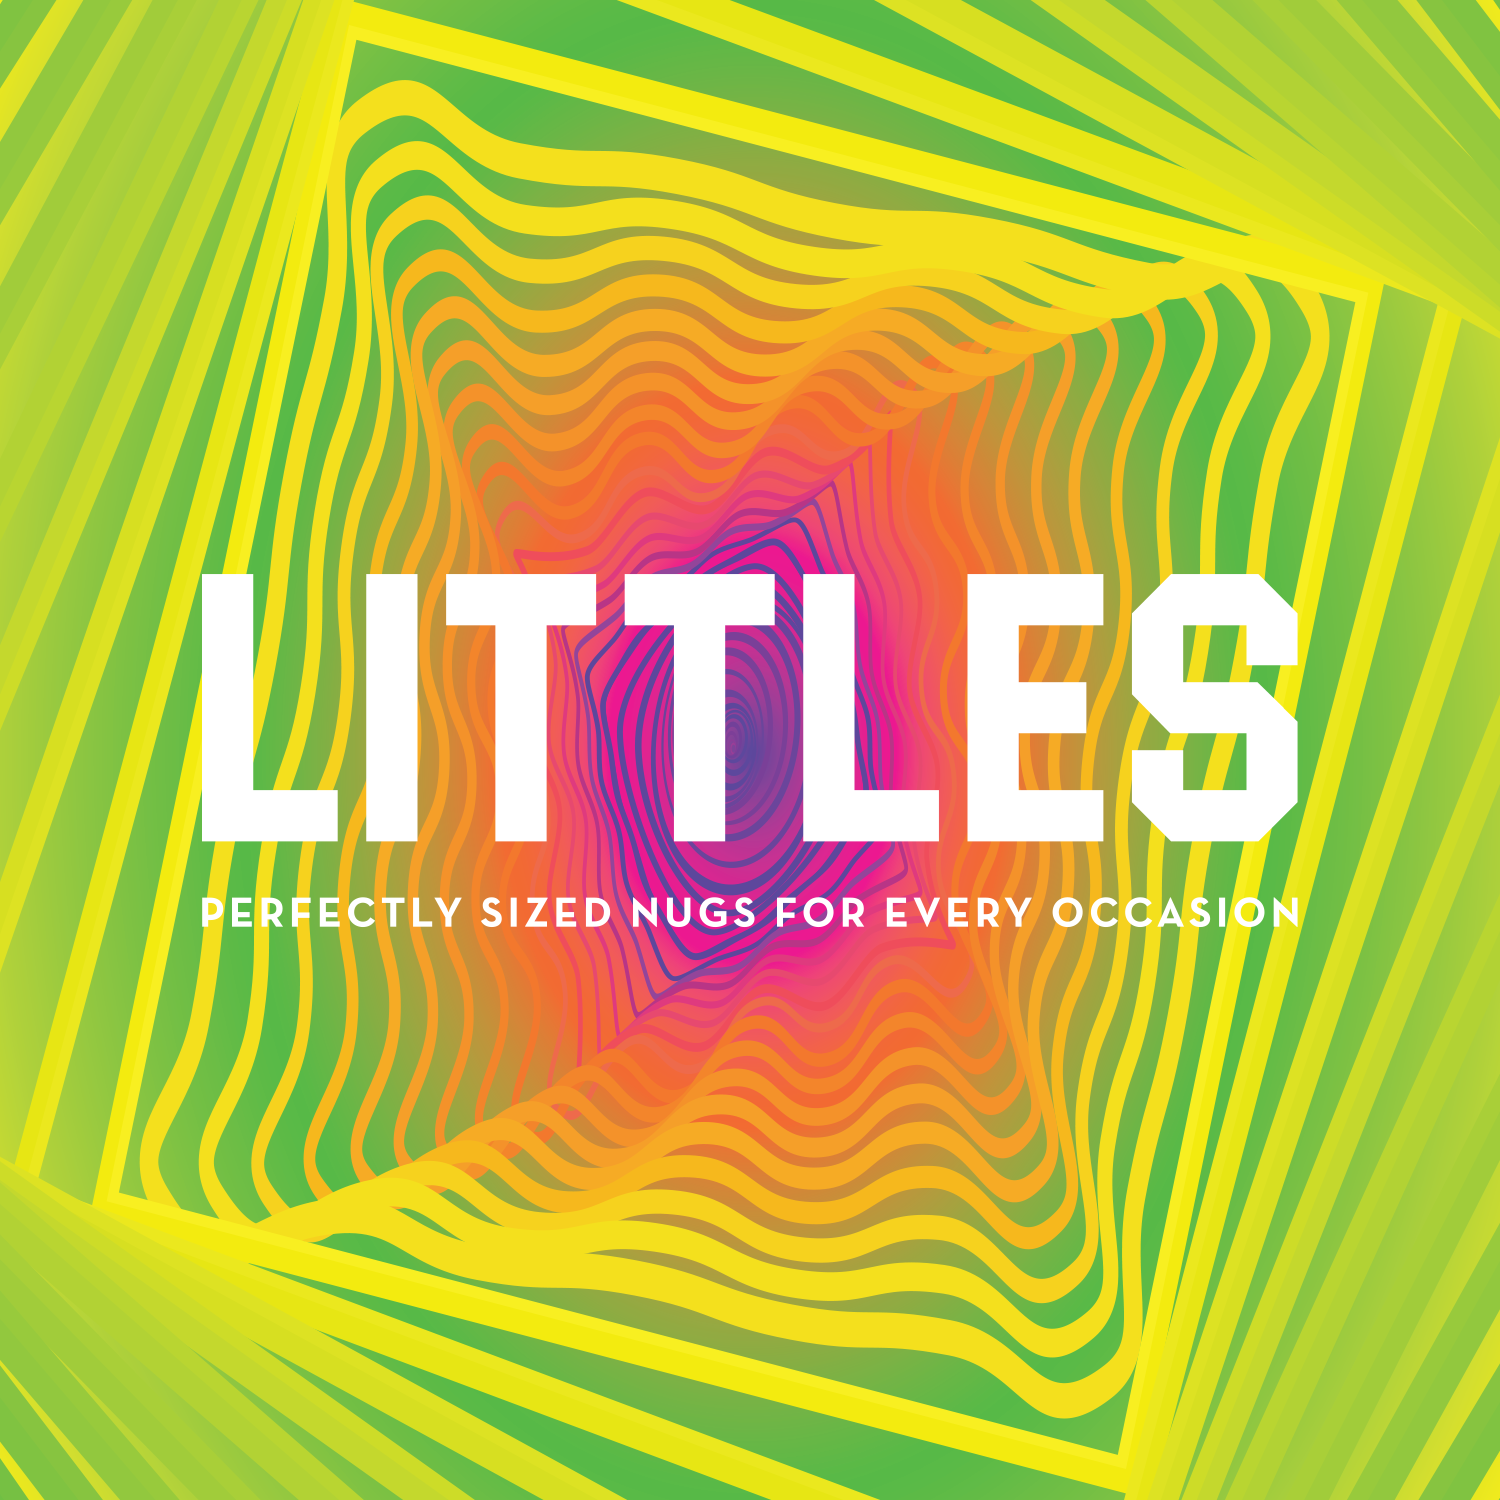 Littles - Perfectly sized nugs for every occasion